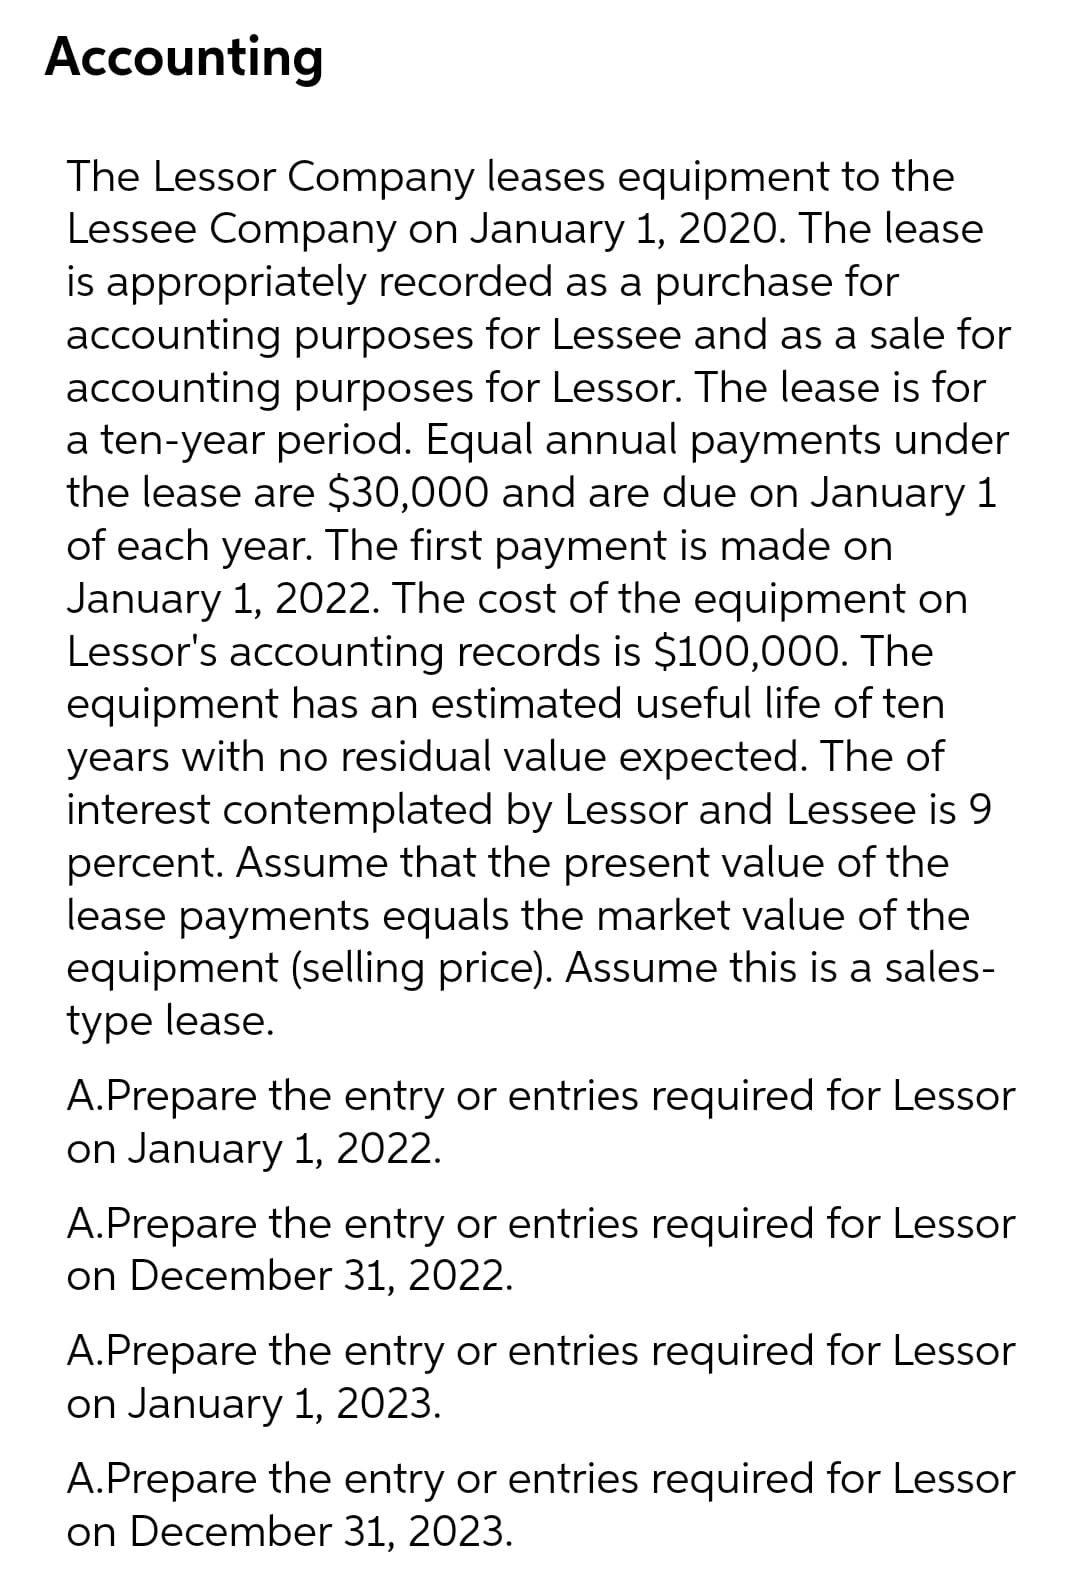 Accounting
The Lessor Company leases equipment to the
Lessee Company on January 1, 2020. The lease
is appropriately recorded as a purchase for
accounting purposes for Lessee and as a sale for
accounting purposes for Lessor. The lease is for
a ten-year period. Equal annual payments under
the lease are $30,000 and are due on January 1
of each year. The first payment is made on
January 1, 2022. The cost of the equipment on
Lessor's accounting records is $100,000. The
equipment has an estimated useful life of ten
years with no residual value expected. The of
interest contemplated by Lessor and Lessee is 9
percent. Assume that the present value of the
lease payments equals the market value of the
equipment (selling price). Assume this is a sales-
type lease.
A.Prepare the entry or entries required for Lessor
on January 1, 2022.
A.Prepare the entry or entries required for Lessor
on December 31, 2022.
A.Prepare the entry or entries required for Lessor
on January 1, 2023.
A.Prepare the entry or entries required for Lessor
on December 31, 2023.
